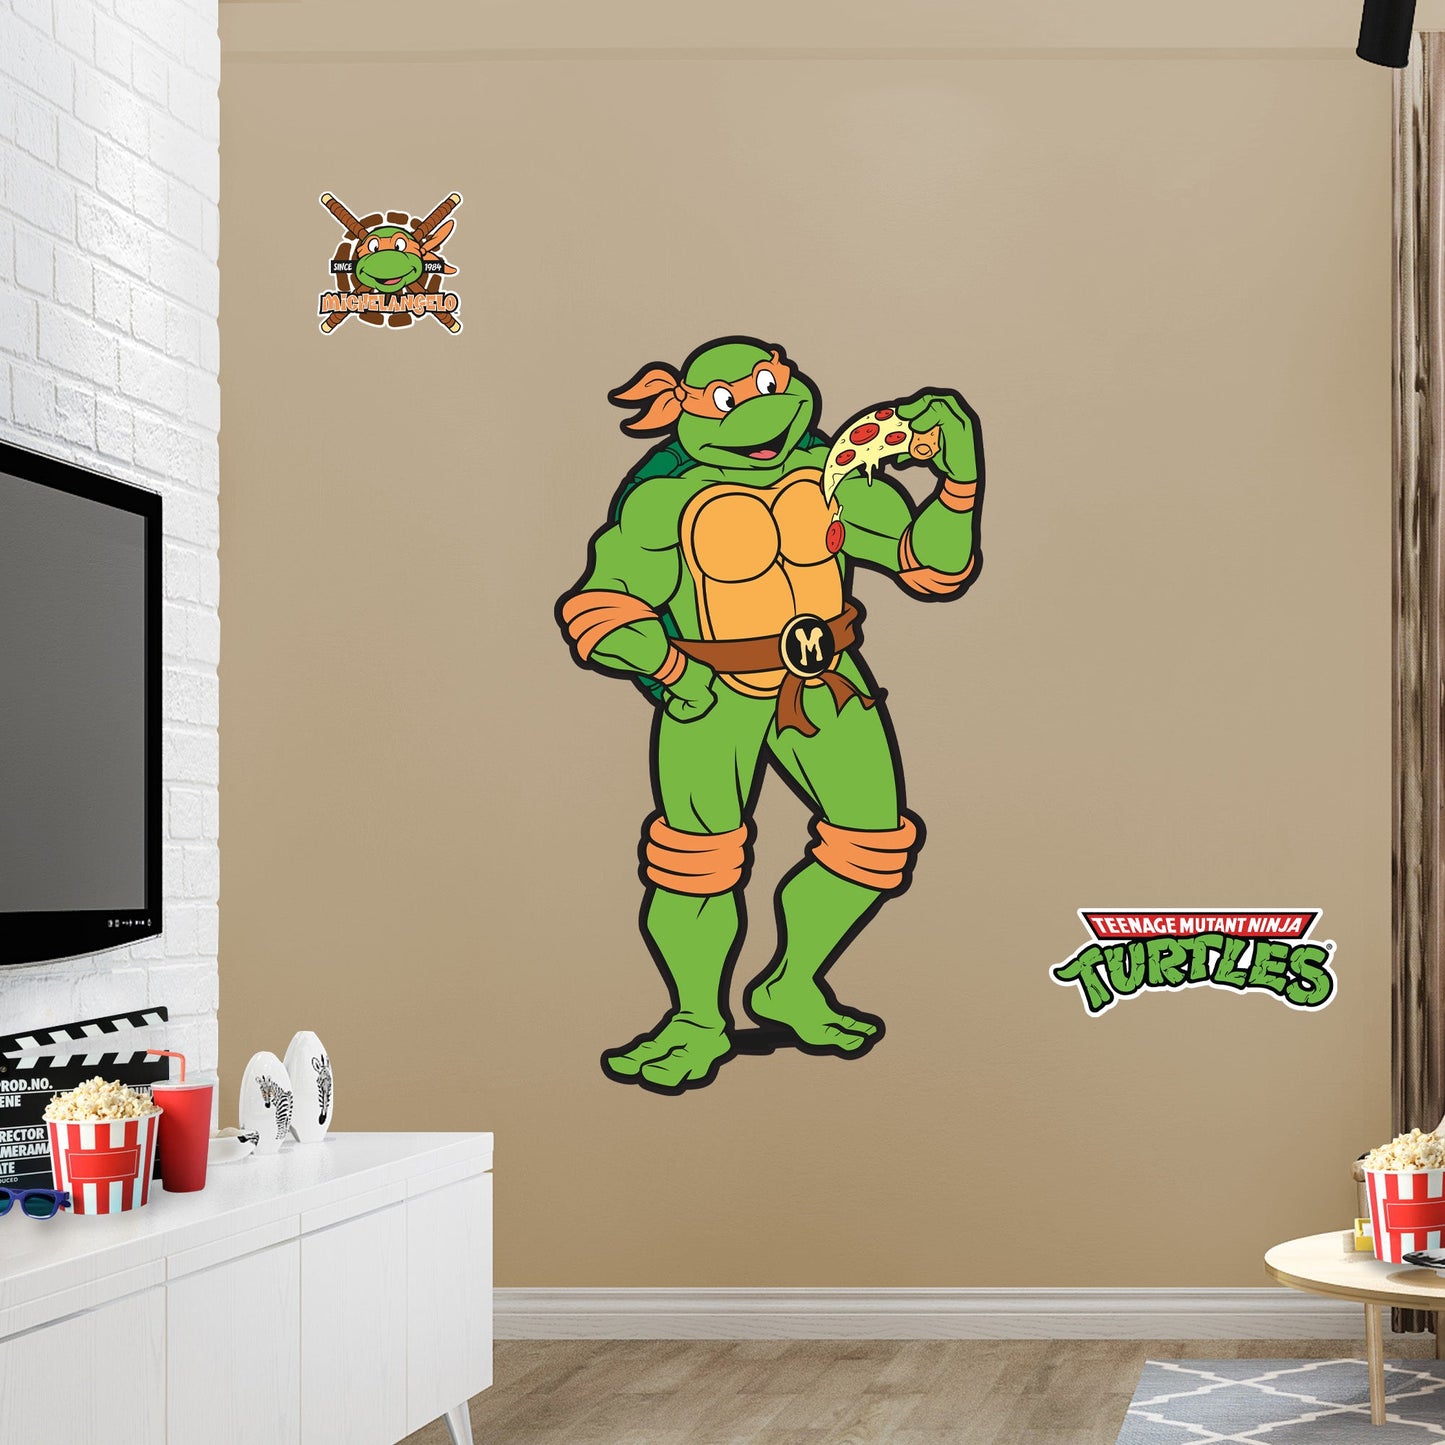 Teenage Mutant Ninja Turtles: Michelangelo Classic RealBig - Officially Licensed Nickelodeon Removable Adhesive Decal